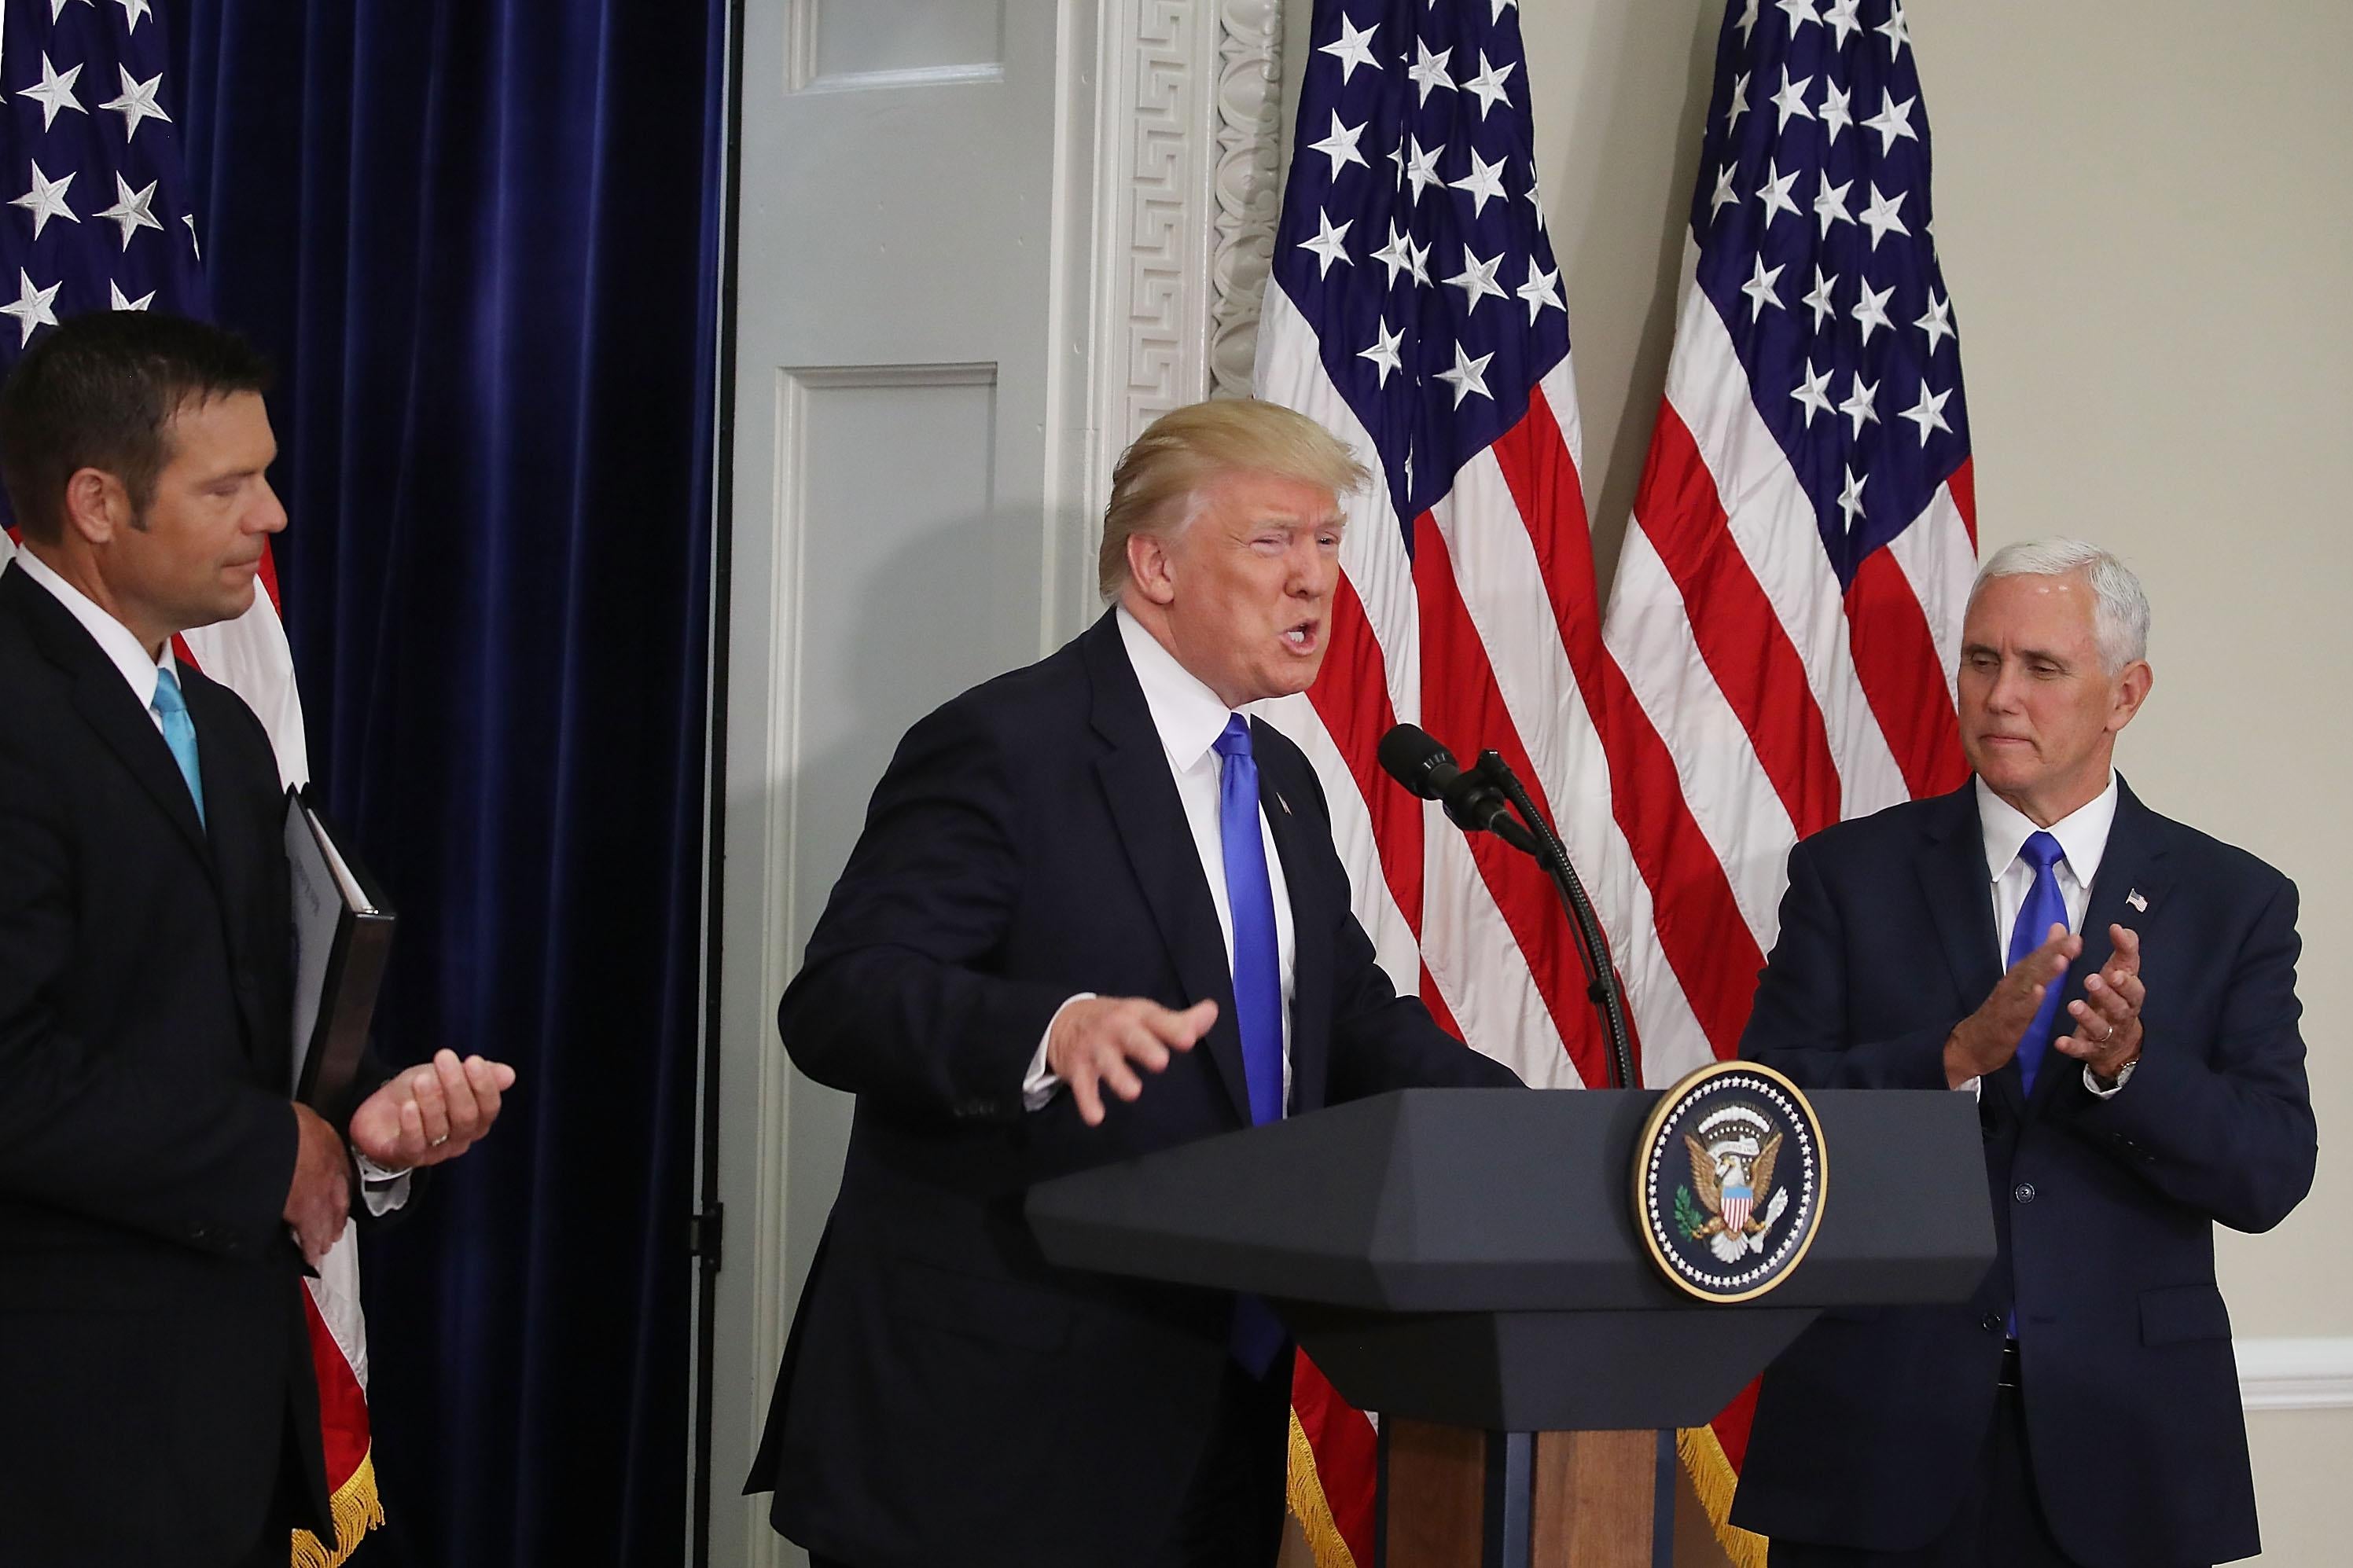 President Donald Trump speaks alongside Kansas Secretary of State, Kris Kobach (L) and Vice President Mike Pence during the first meeting of the voter fraud commission on July 19, 2017 in Washington, DC.